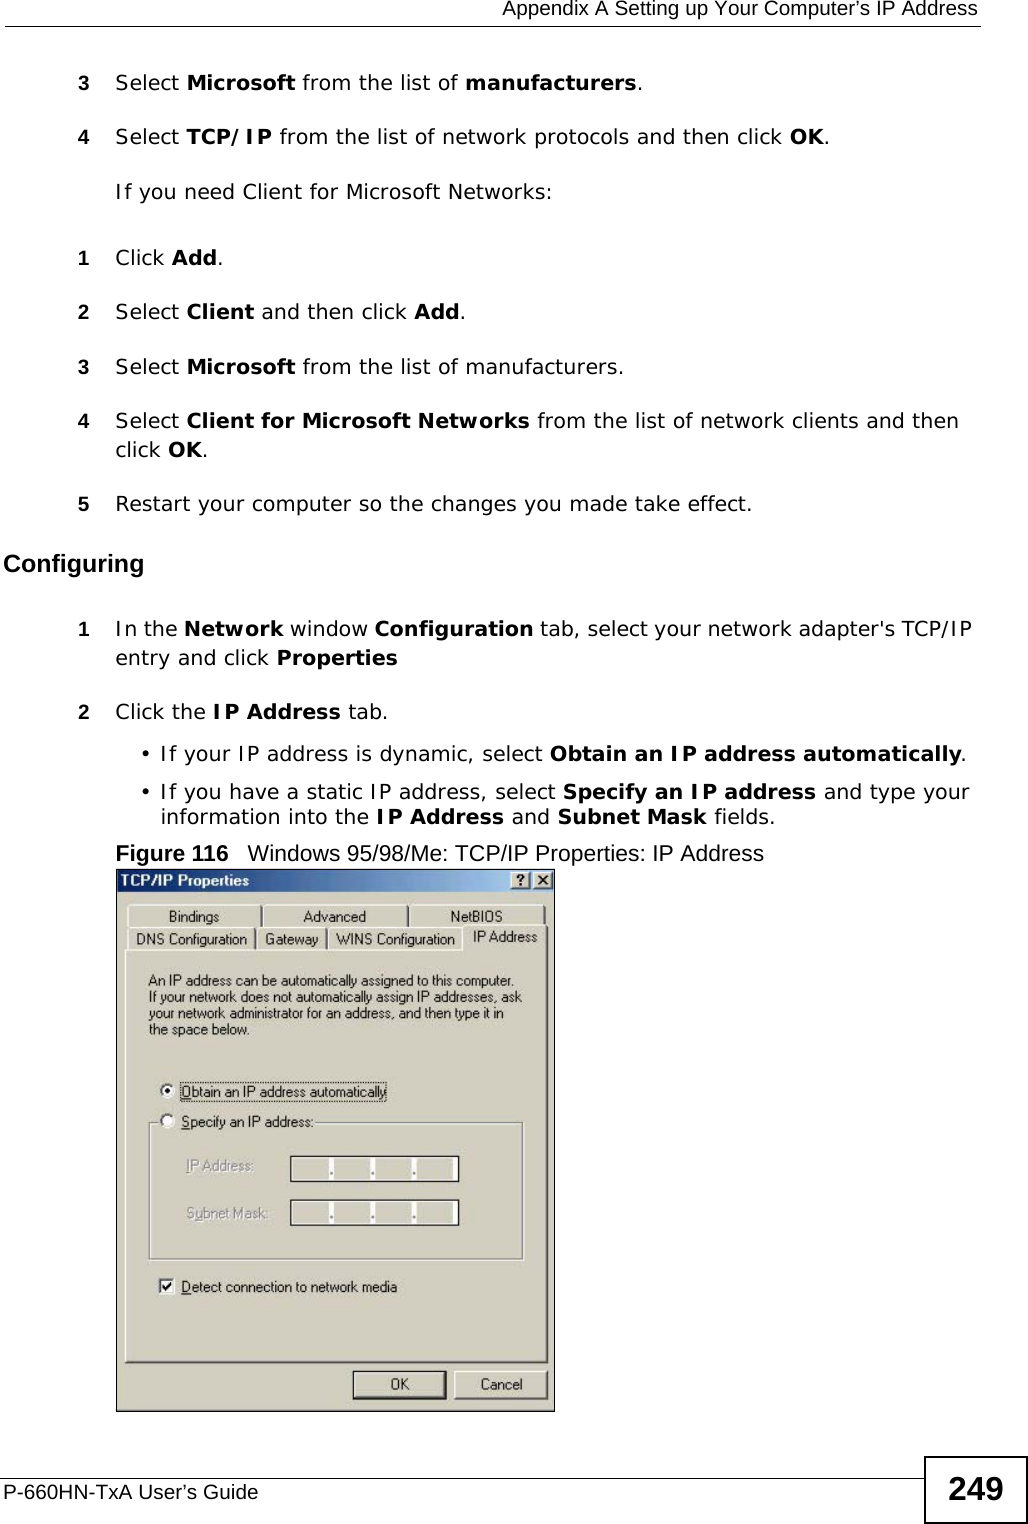  Appendix A Setting up Your Computer’s IP AddressP-660HN-TxA User’s Guide 2493Select Microsoft from the list of manufacturers.4Select TCP/IP from the list of network protocols and then click OK.If you need Client for Microsoft Networks:1Click Add.2Select Client and then click Add.3Select Microsoft from the list of manufacturers.4Select Client for Microsoft Networks from the list of network clients and then click OK.5Restart your computer so the changes you made take effect.Configuring 1In the Network window Configuration tab, select your network adapter&apos;s TCP/IP entry and click Properties2Click the IP Address tab.• If your IP address is dynamic, select Obtain an IP address automatically. • If you have a static IP address, select Specify an IP address and type your information into the IP Address and Subnet Mask fields.Figure 116   Windows 95/98/Me: TCP/IP Properties: IP Address